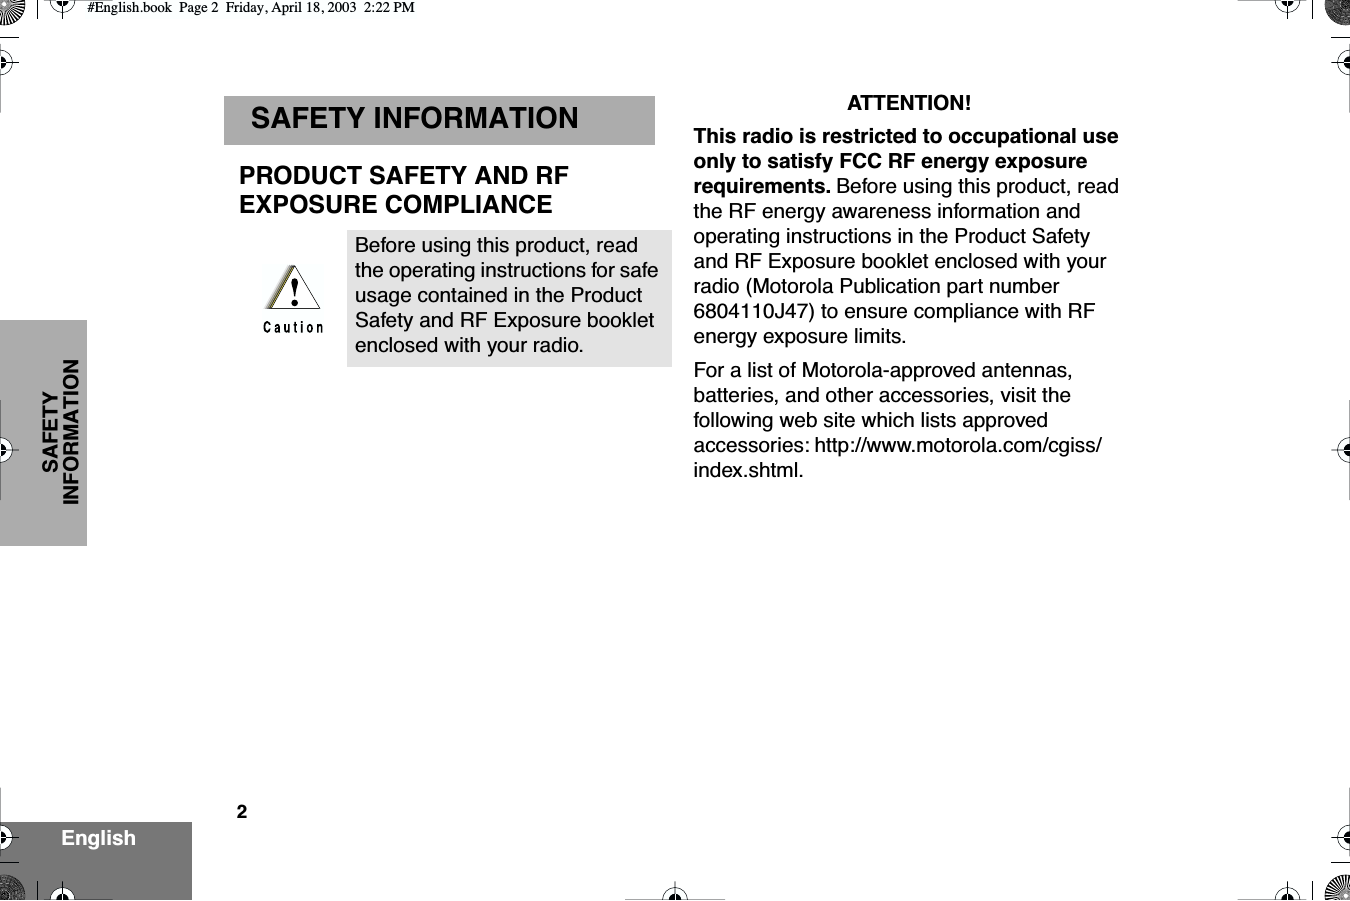  2 EnglishSAFETY INFORMATION SAFETY INFORMATION PRODUCT SAFETY AND RFEXPOSURE COMPLIANCE ATTENTION!This radio is restricted to occupational use only to satisfy FCC RF energy exposure requirements.  Before using this product, read the RF energy awareness information and operating instructions in the Product Safety and RF Exposure booklet enclosed with your radio (Motorola Publication part number 6804110J47) to ensure compliance with RF energy exposure limits.For a list of Motorola-approved antennas, batteries, and other accessories, visit the following web site which lists approved accessories: http://www.motorola.com/cgiss/index.shtml.Before using this product, read the operating instructions for safe usage contained in the Product Safety and RF Exposure booklet enclosed with your radio. #English.book  Page 2  Friday, April 18, 2003  2:22 PM